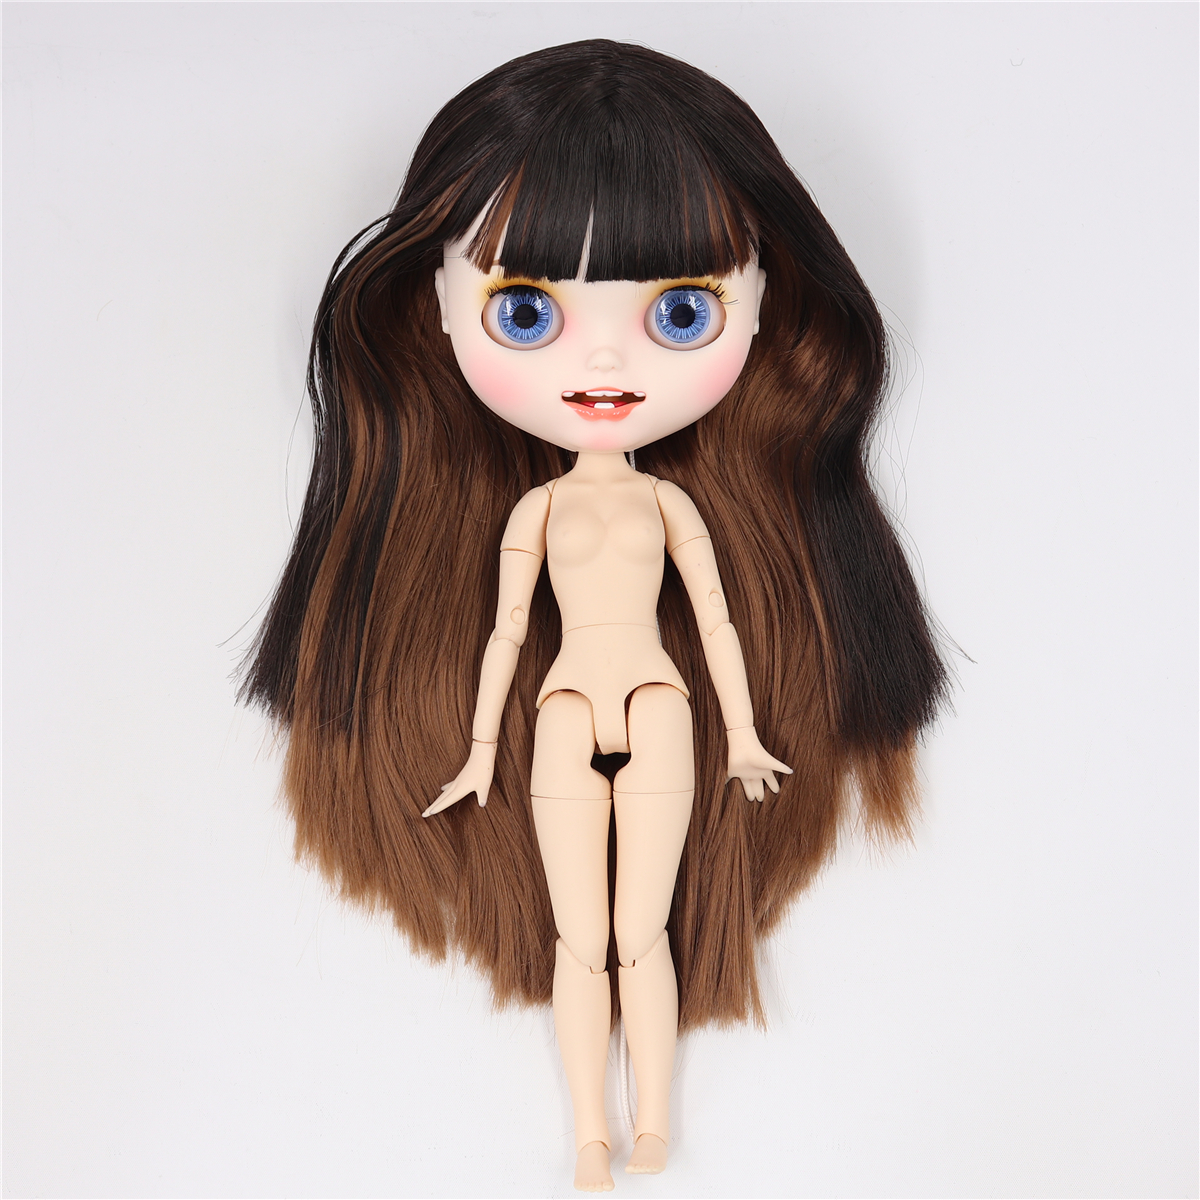 ICY DBS Blyth doll white skin joint body custom doll bjd toy matte face BROWN hair naked doll 30cm